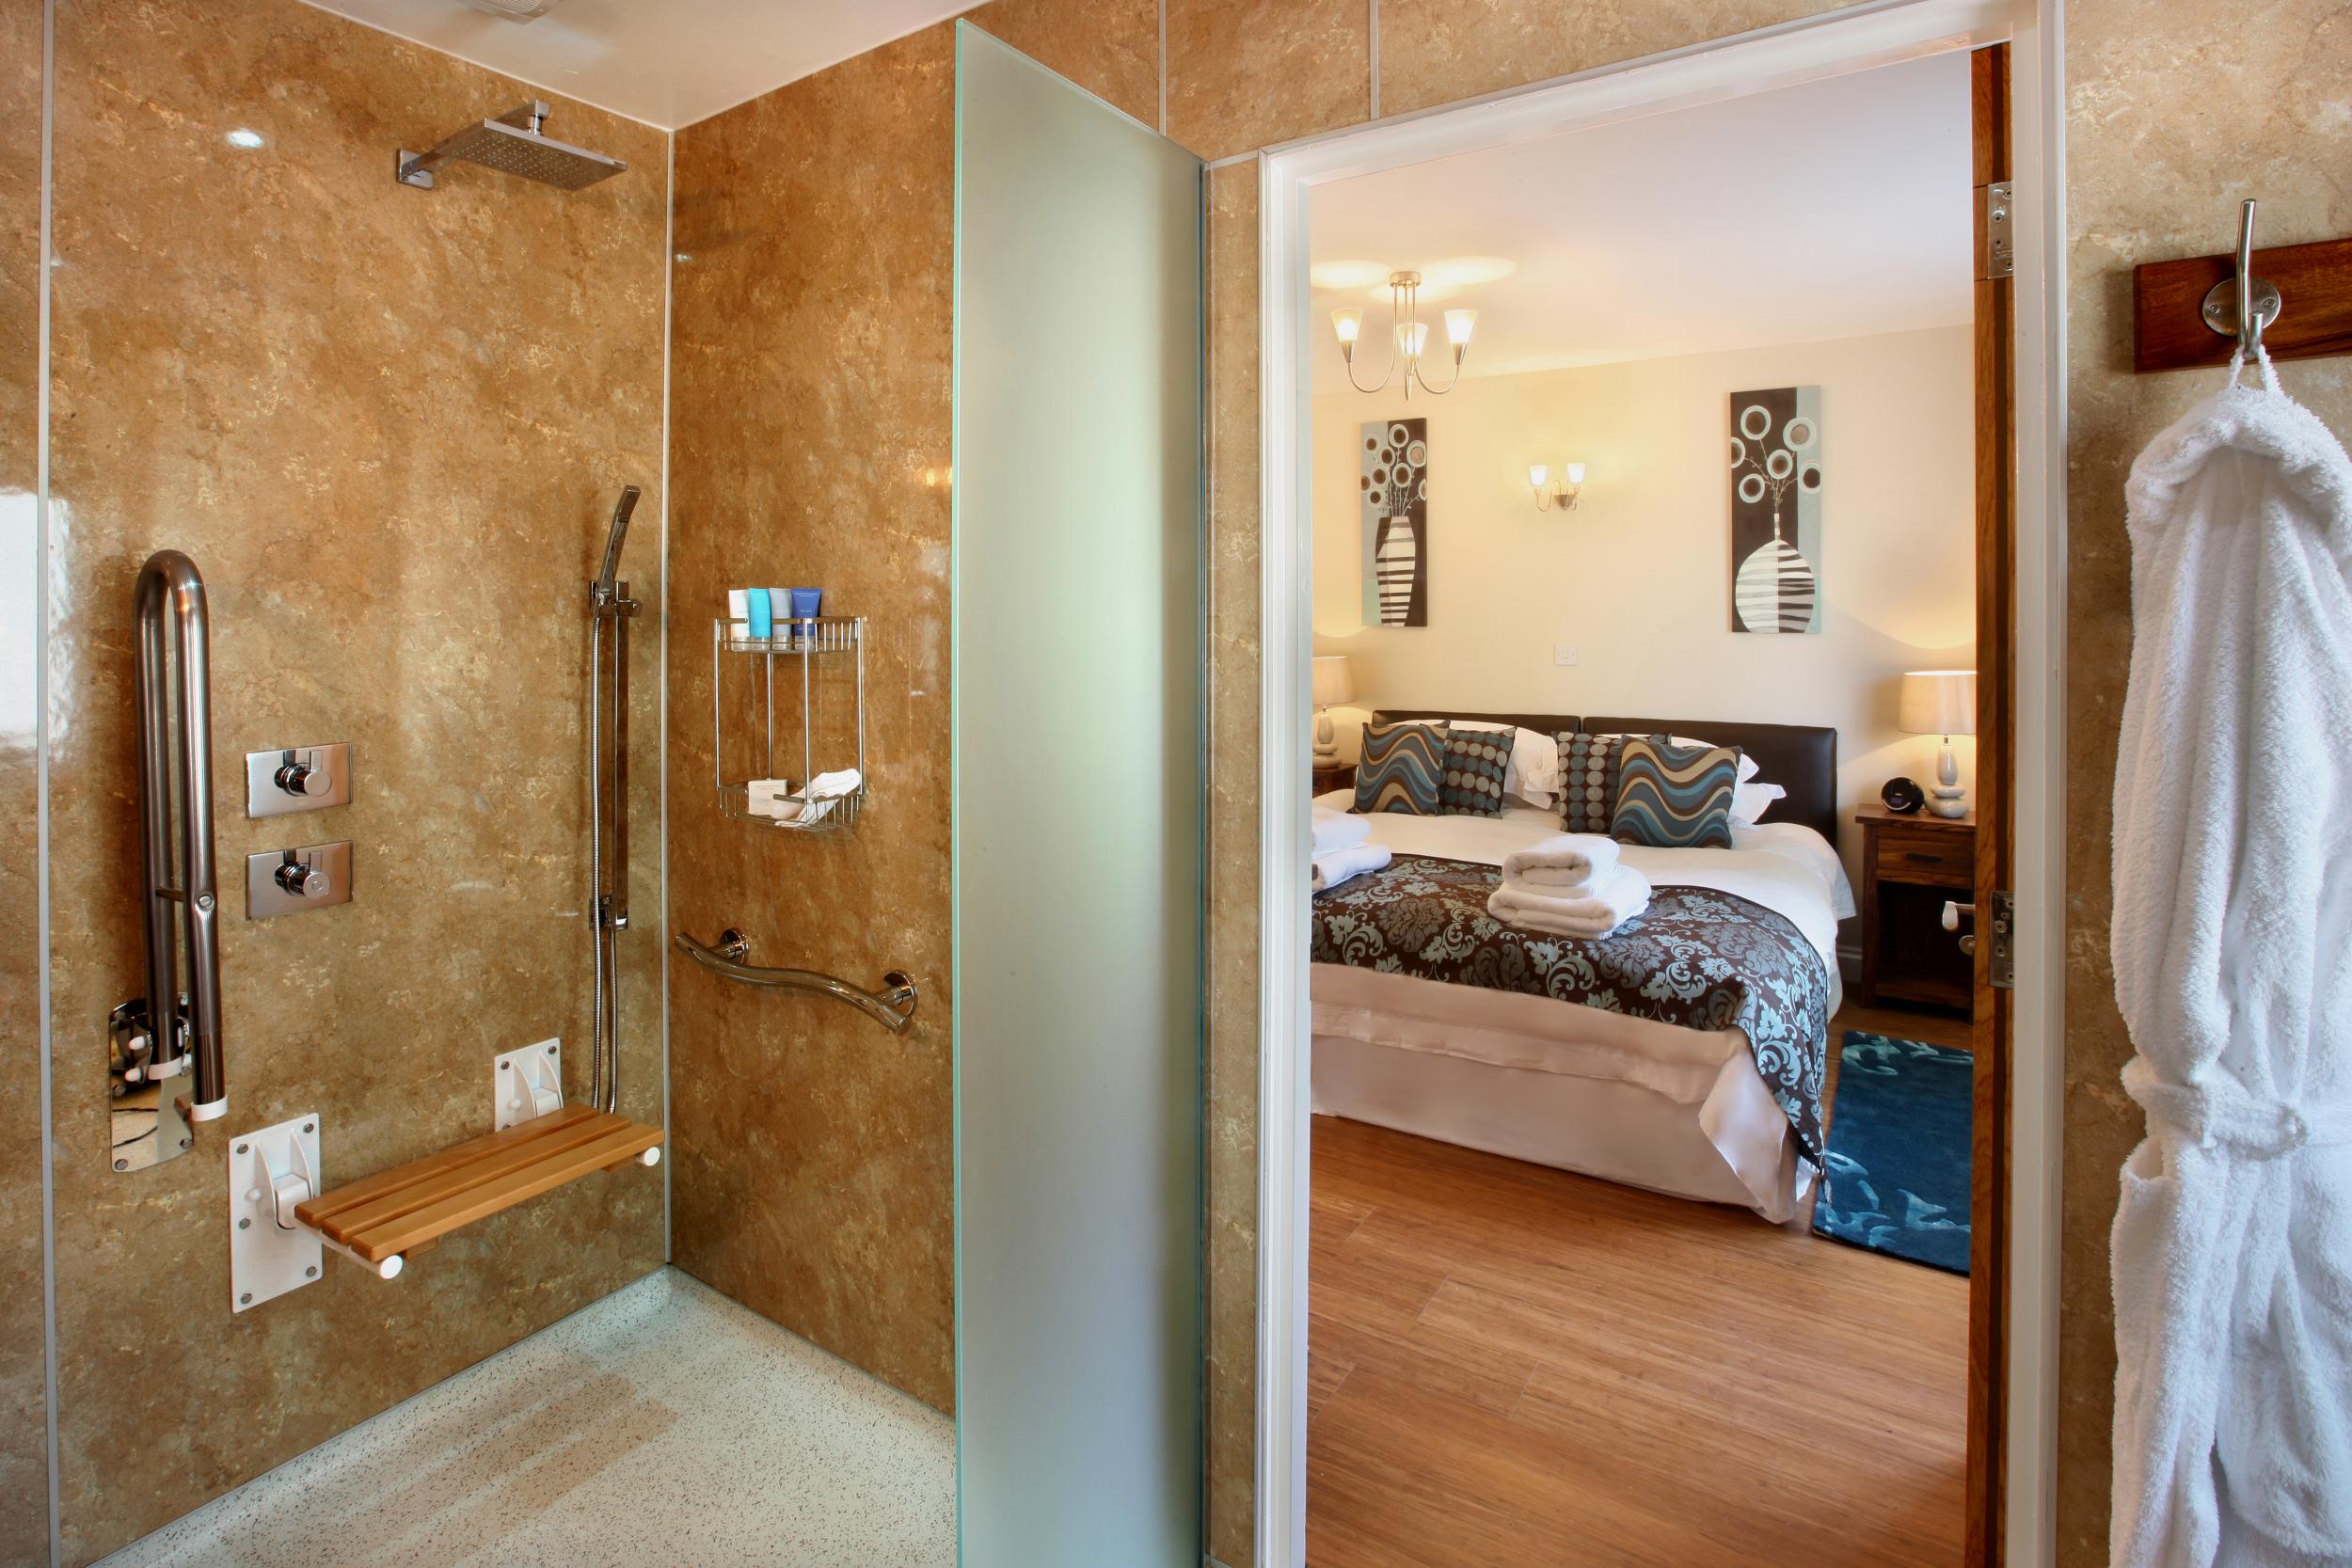 The en suite features a pull-down shower seat